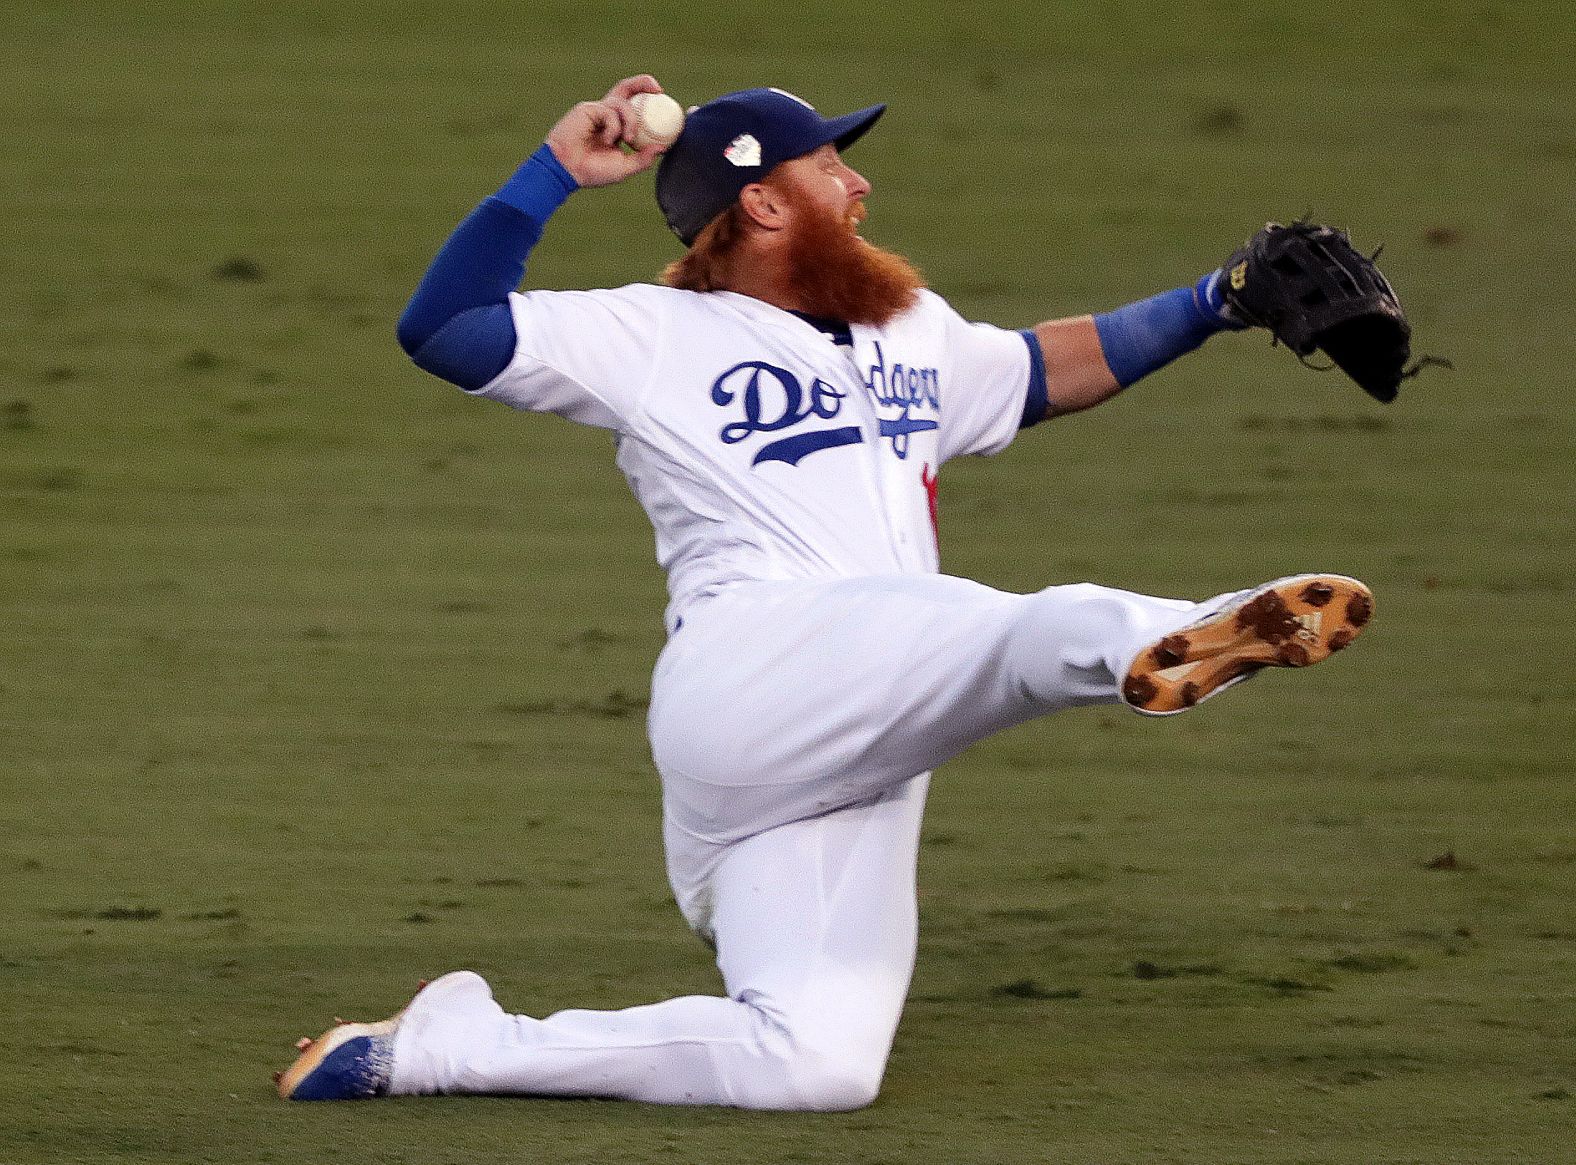 Dodgers third baseman Justin Turner fields a single by Red Sox center fielder Jackie Bradley Jr. during the third inning of Game 3 at Dodger Stadium.